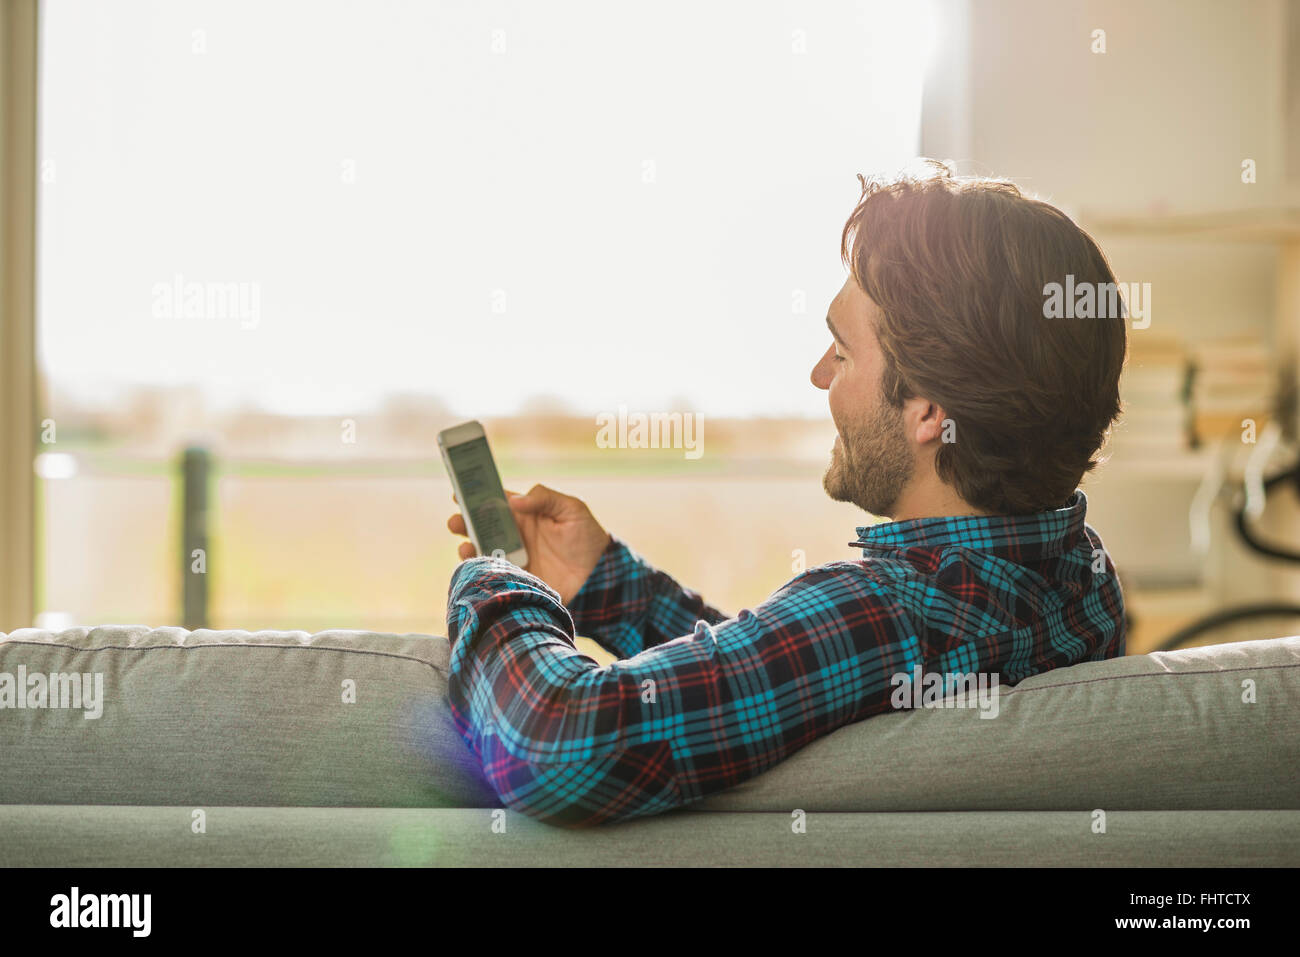 Smiling young man leaning on backrest of the couch looking at his smartphone Stock Photo